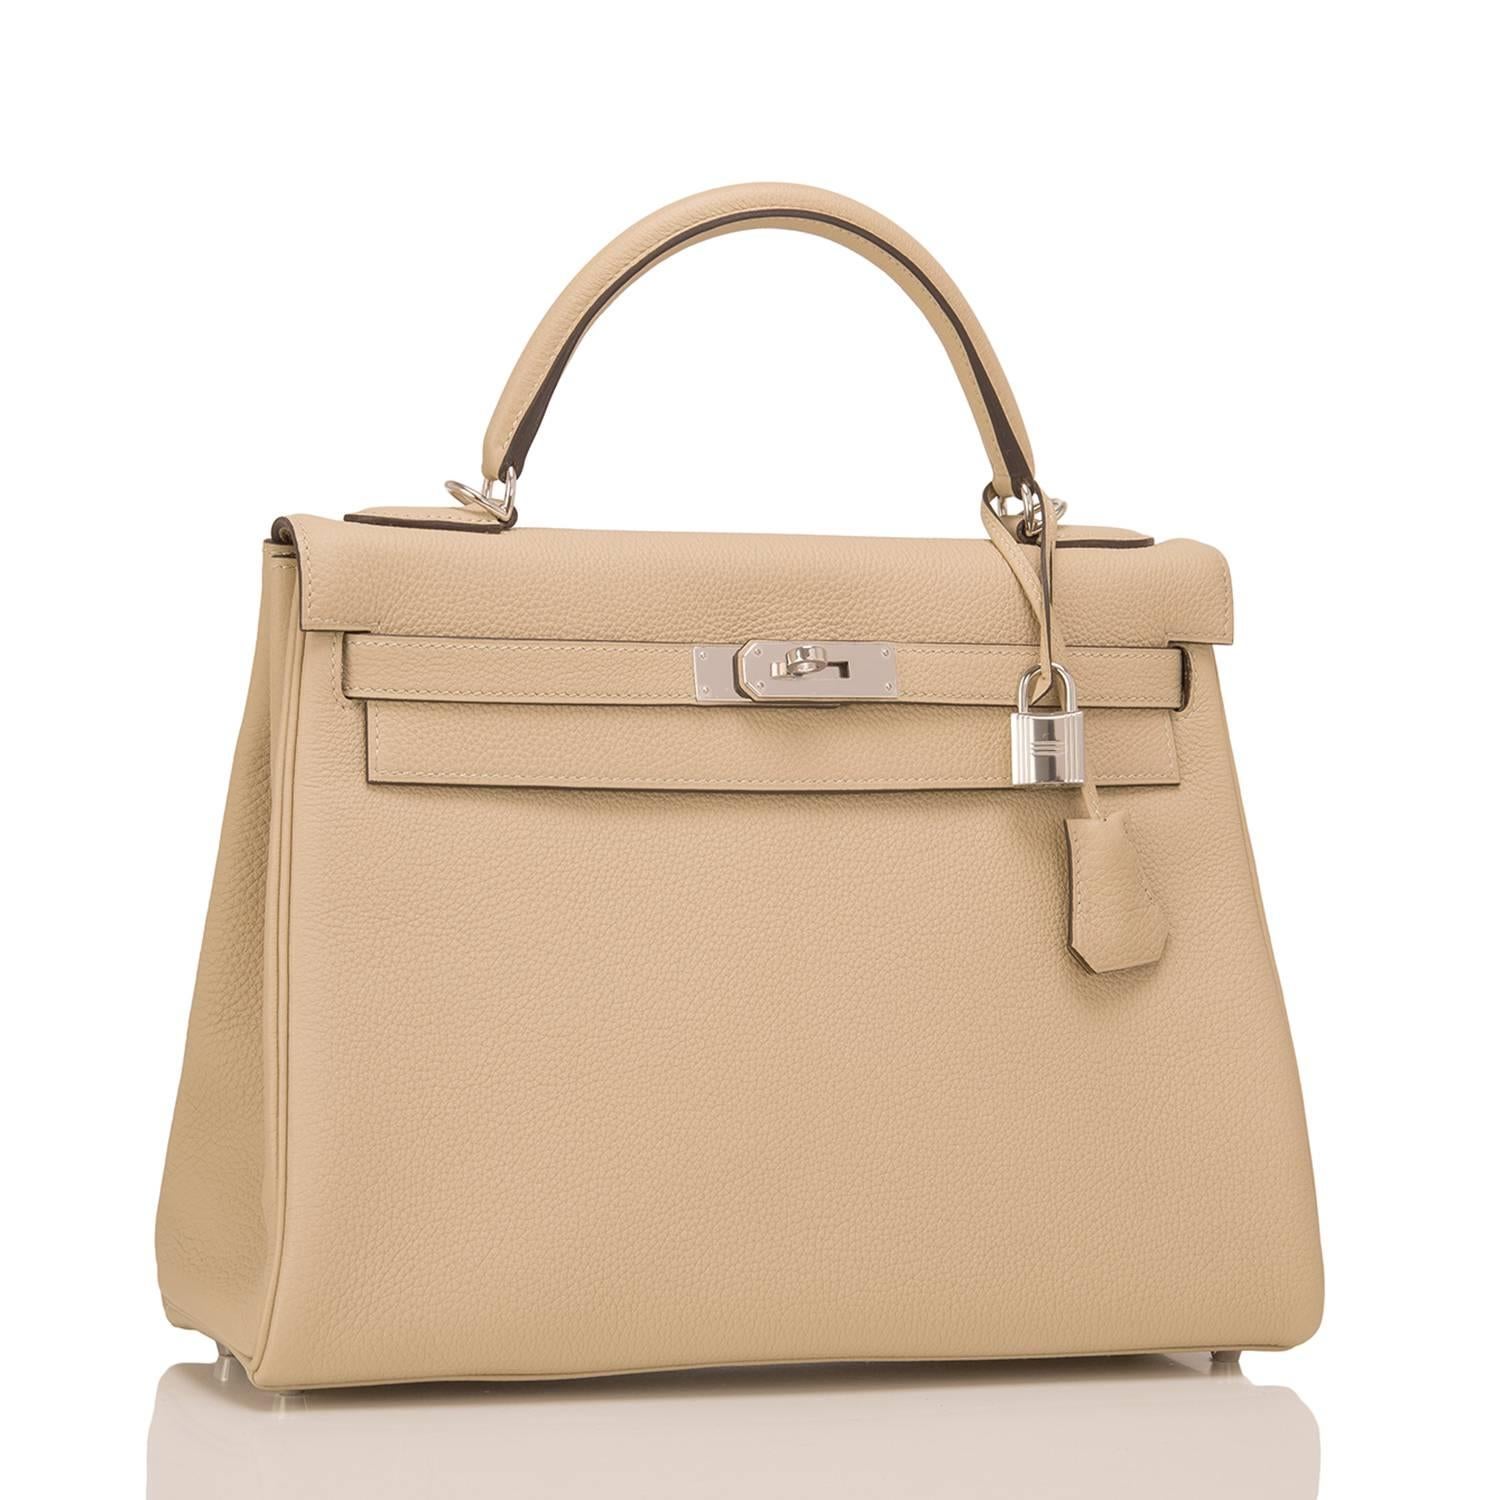 Hermes Trench Kelly 32cm of togo leather with palladium hardware.

This Kelly, in the Retourne style, has tonal stitching, a front toggle closure, a clochette with lock and two keys, a single rolled handle, and a removable shoulder strap.

The